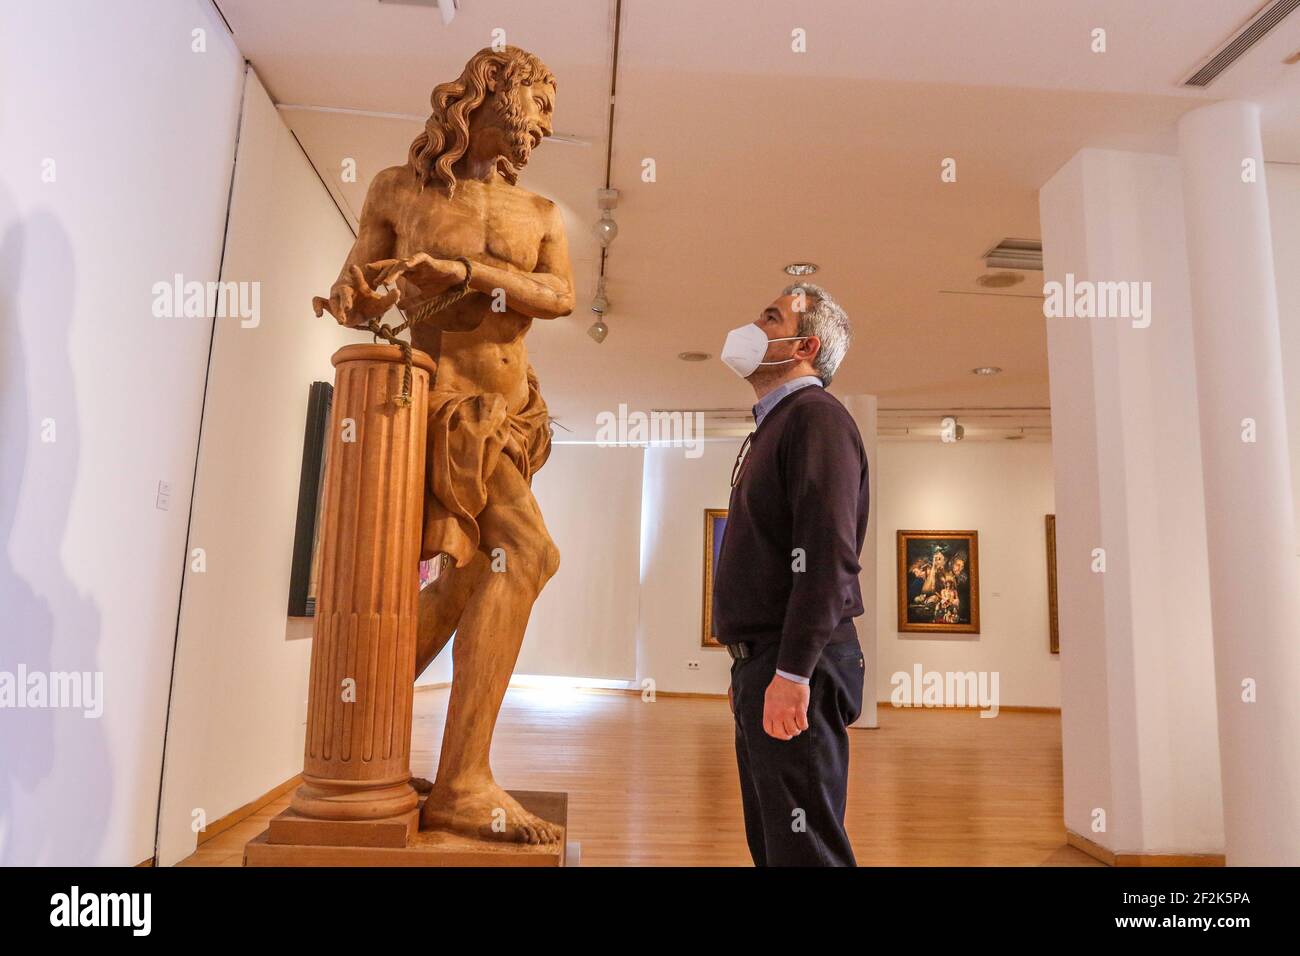 Malaga, Spain. March 12, 2021: March 12, 2021 (Malaga) to collective exhibition 'The Current Sacred Art in Malaga', which will accompany that of Azaustre, is composed of works by 12 prestigious artists. Visitors can admire the creations of RaÃºl Berzosa, Eugenio Chicano, Leonardo FernÃ¡ndez, Manuel Higueras, Antonio Montiel, Pepe Palma, Fernando Prini, Conchi Quesada, Félix Revello, Suso de Marcos, José MarÃ-a Ruiz Montes and Juan Vega. Nine painters and draughtsmen, and three sculptors (imagers), who offer the public part of the panorama of religious art in Malaga (Credit Image: © Lorenzo Car Stock Photo